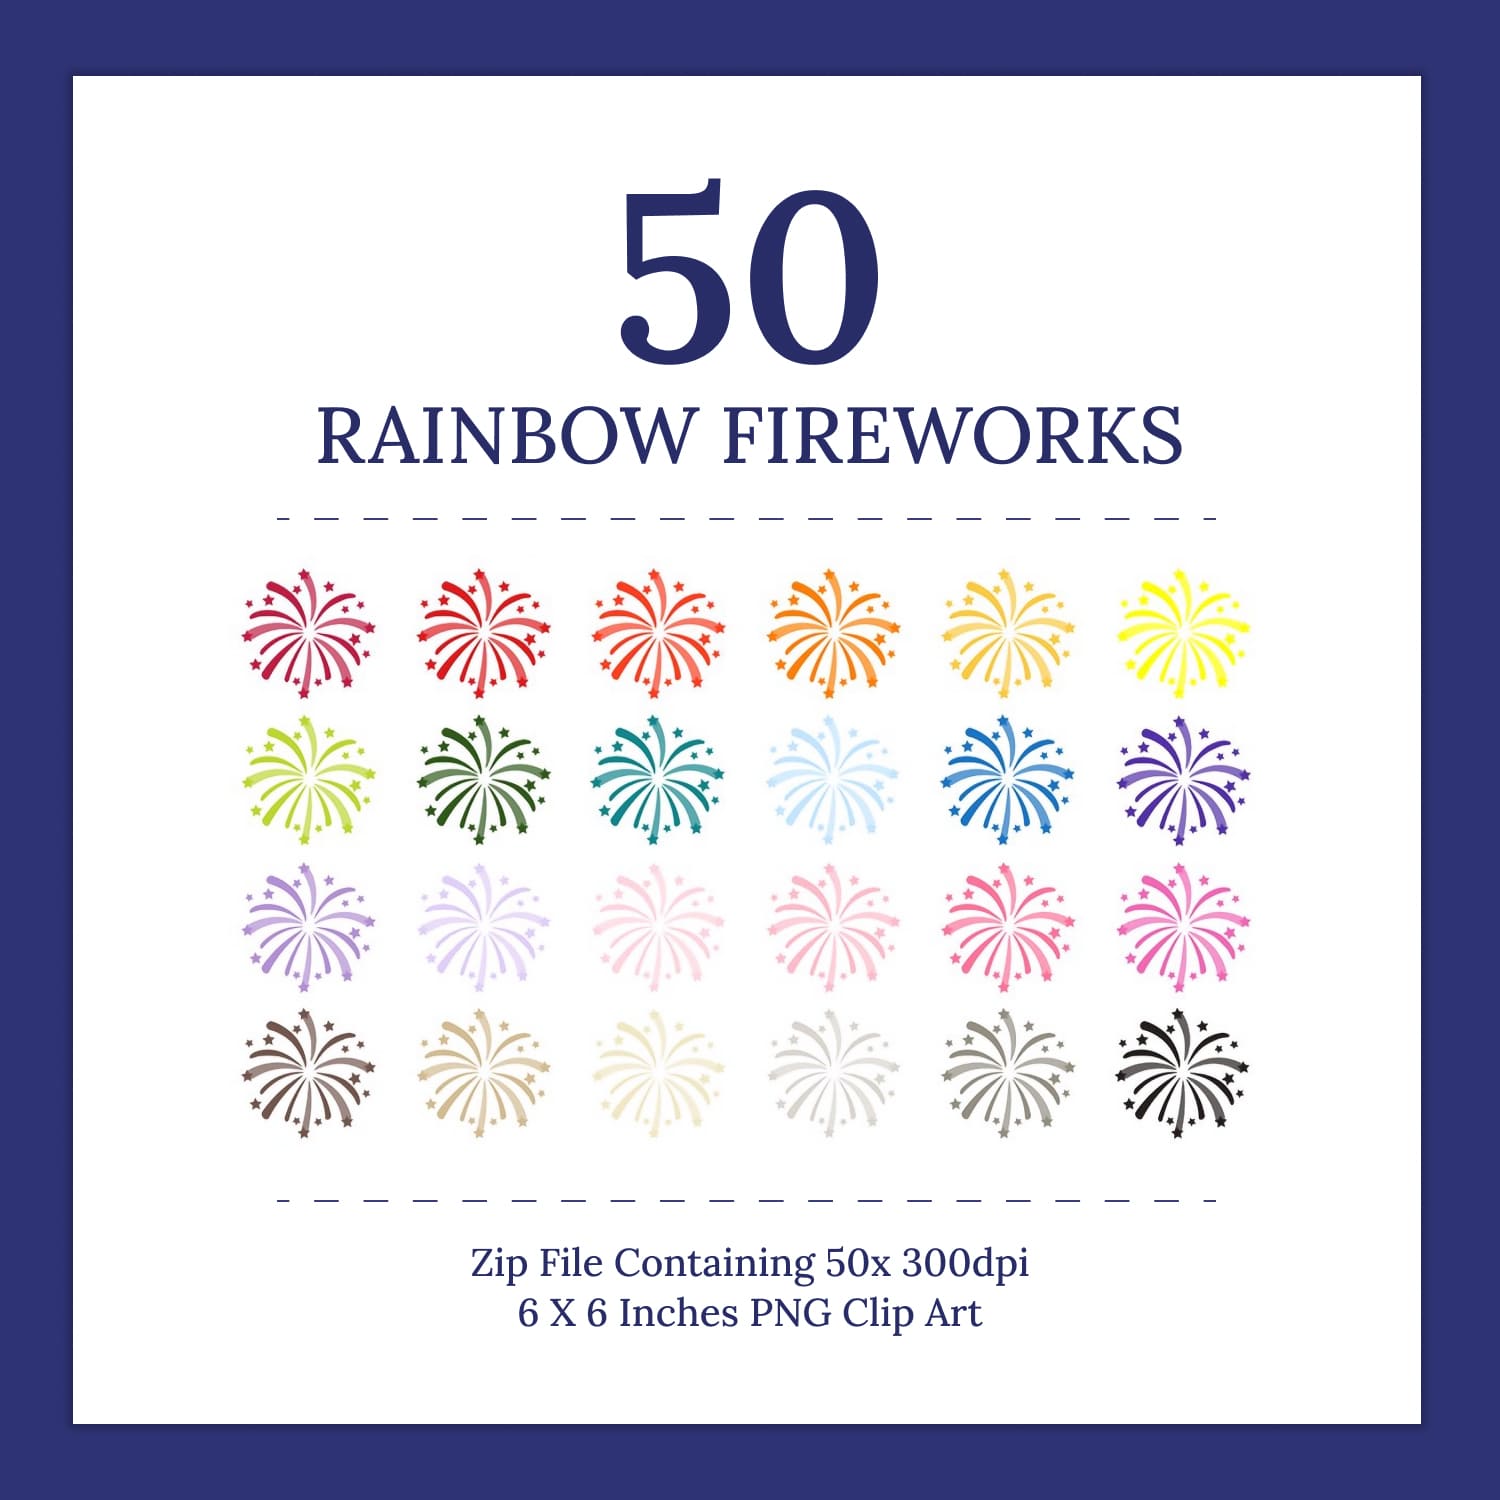 50 Rainbow Fireworks Clip Art - main image preview.